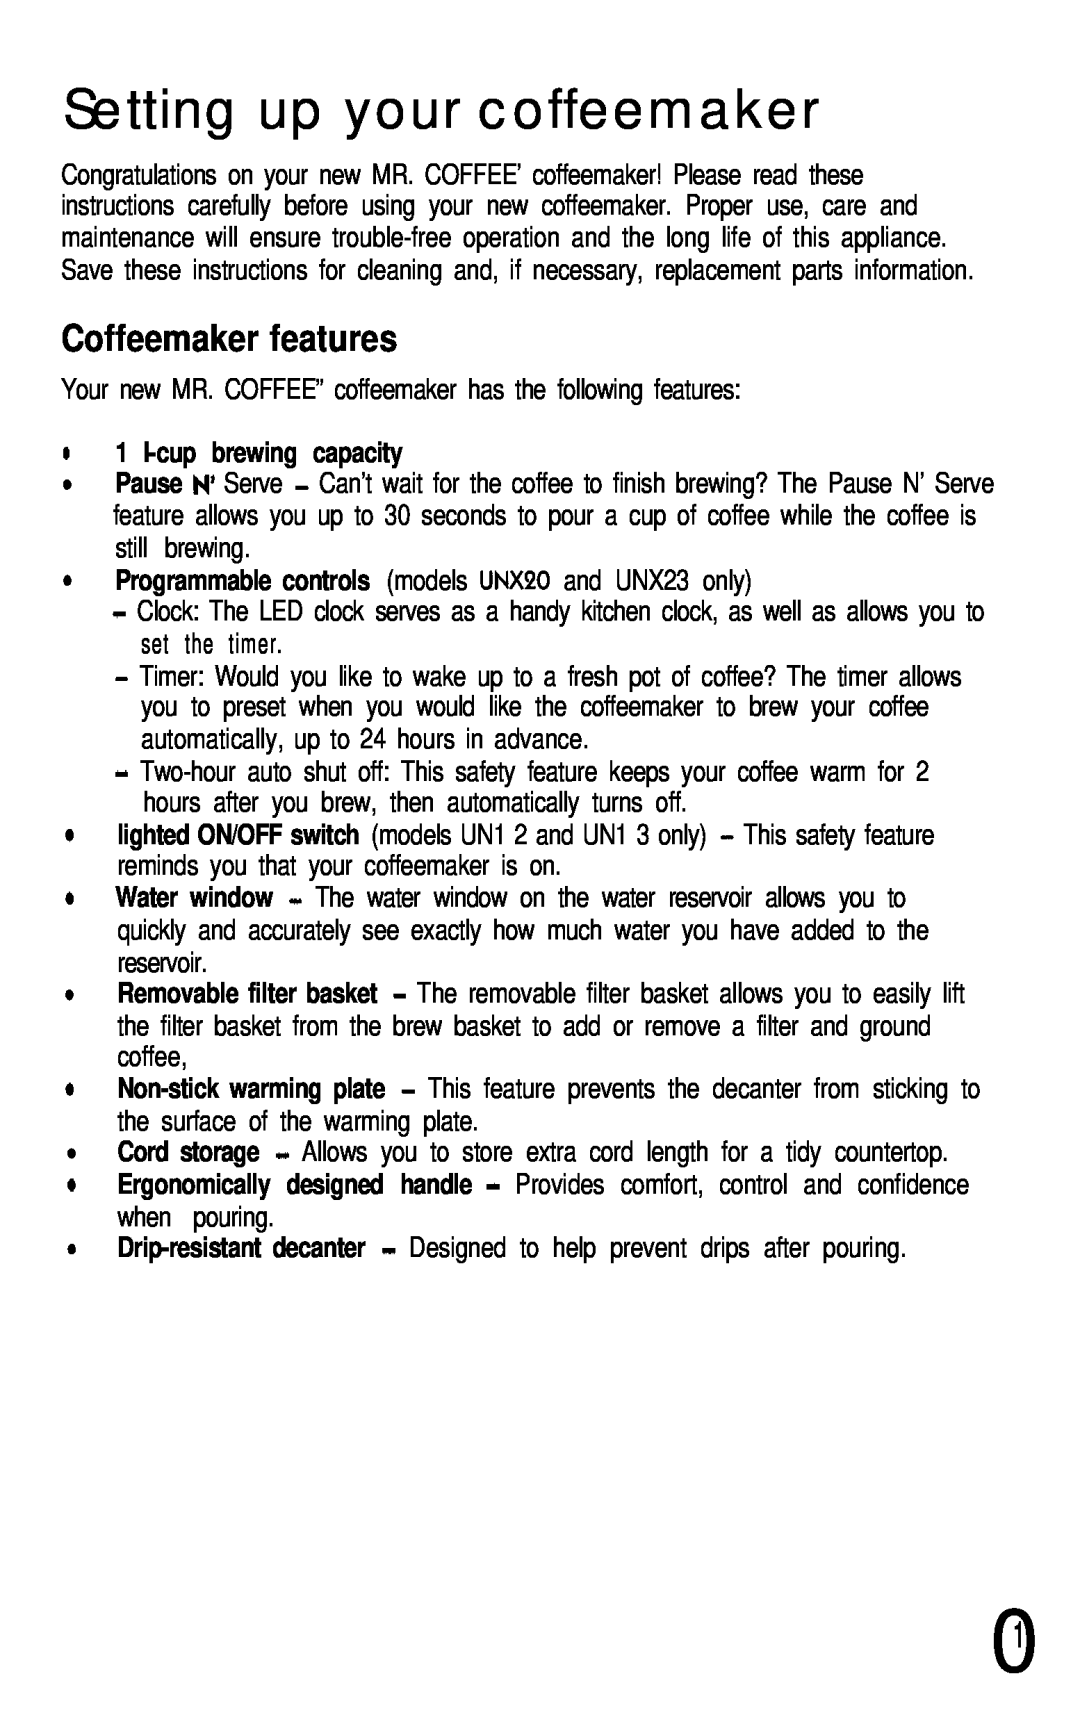 Mr. Coffee UN12 user manual Setting up your coffeemaker, Coffeemaker features 